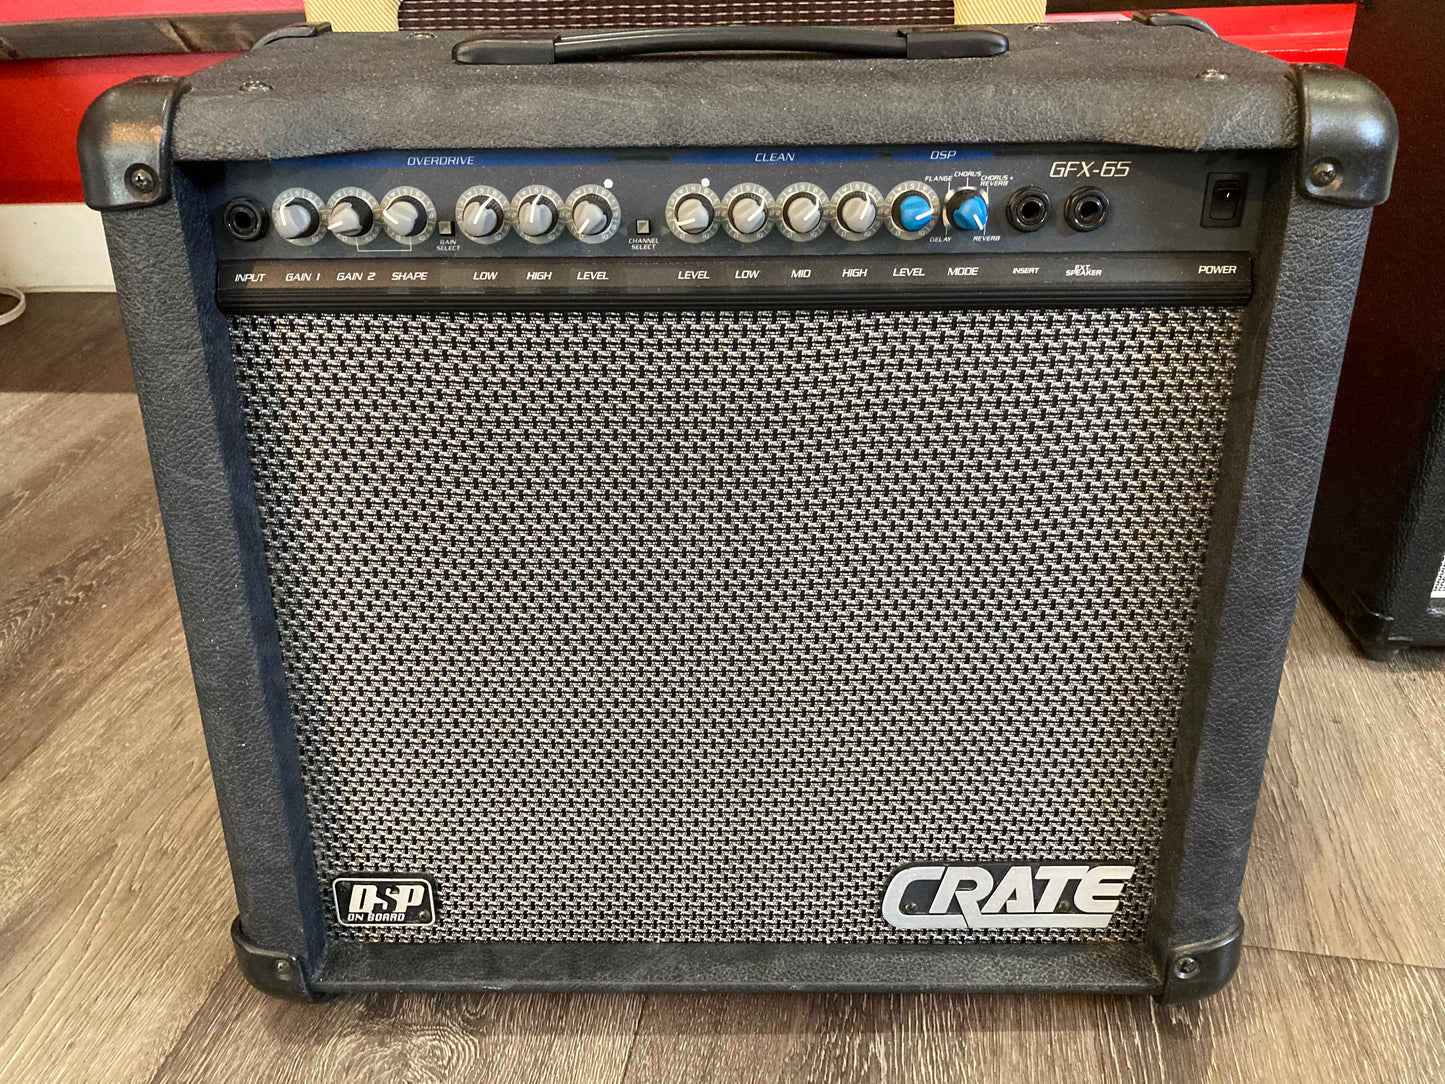 Rare Crate GFX-65 Electric Guitar Amplifier Combo - Used